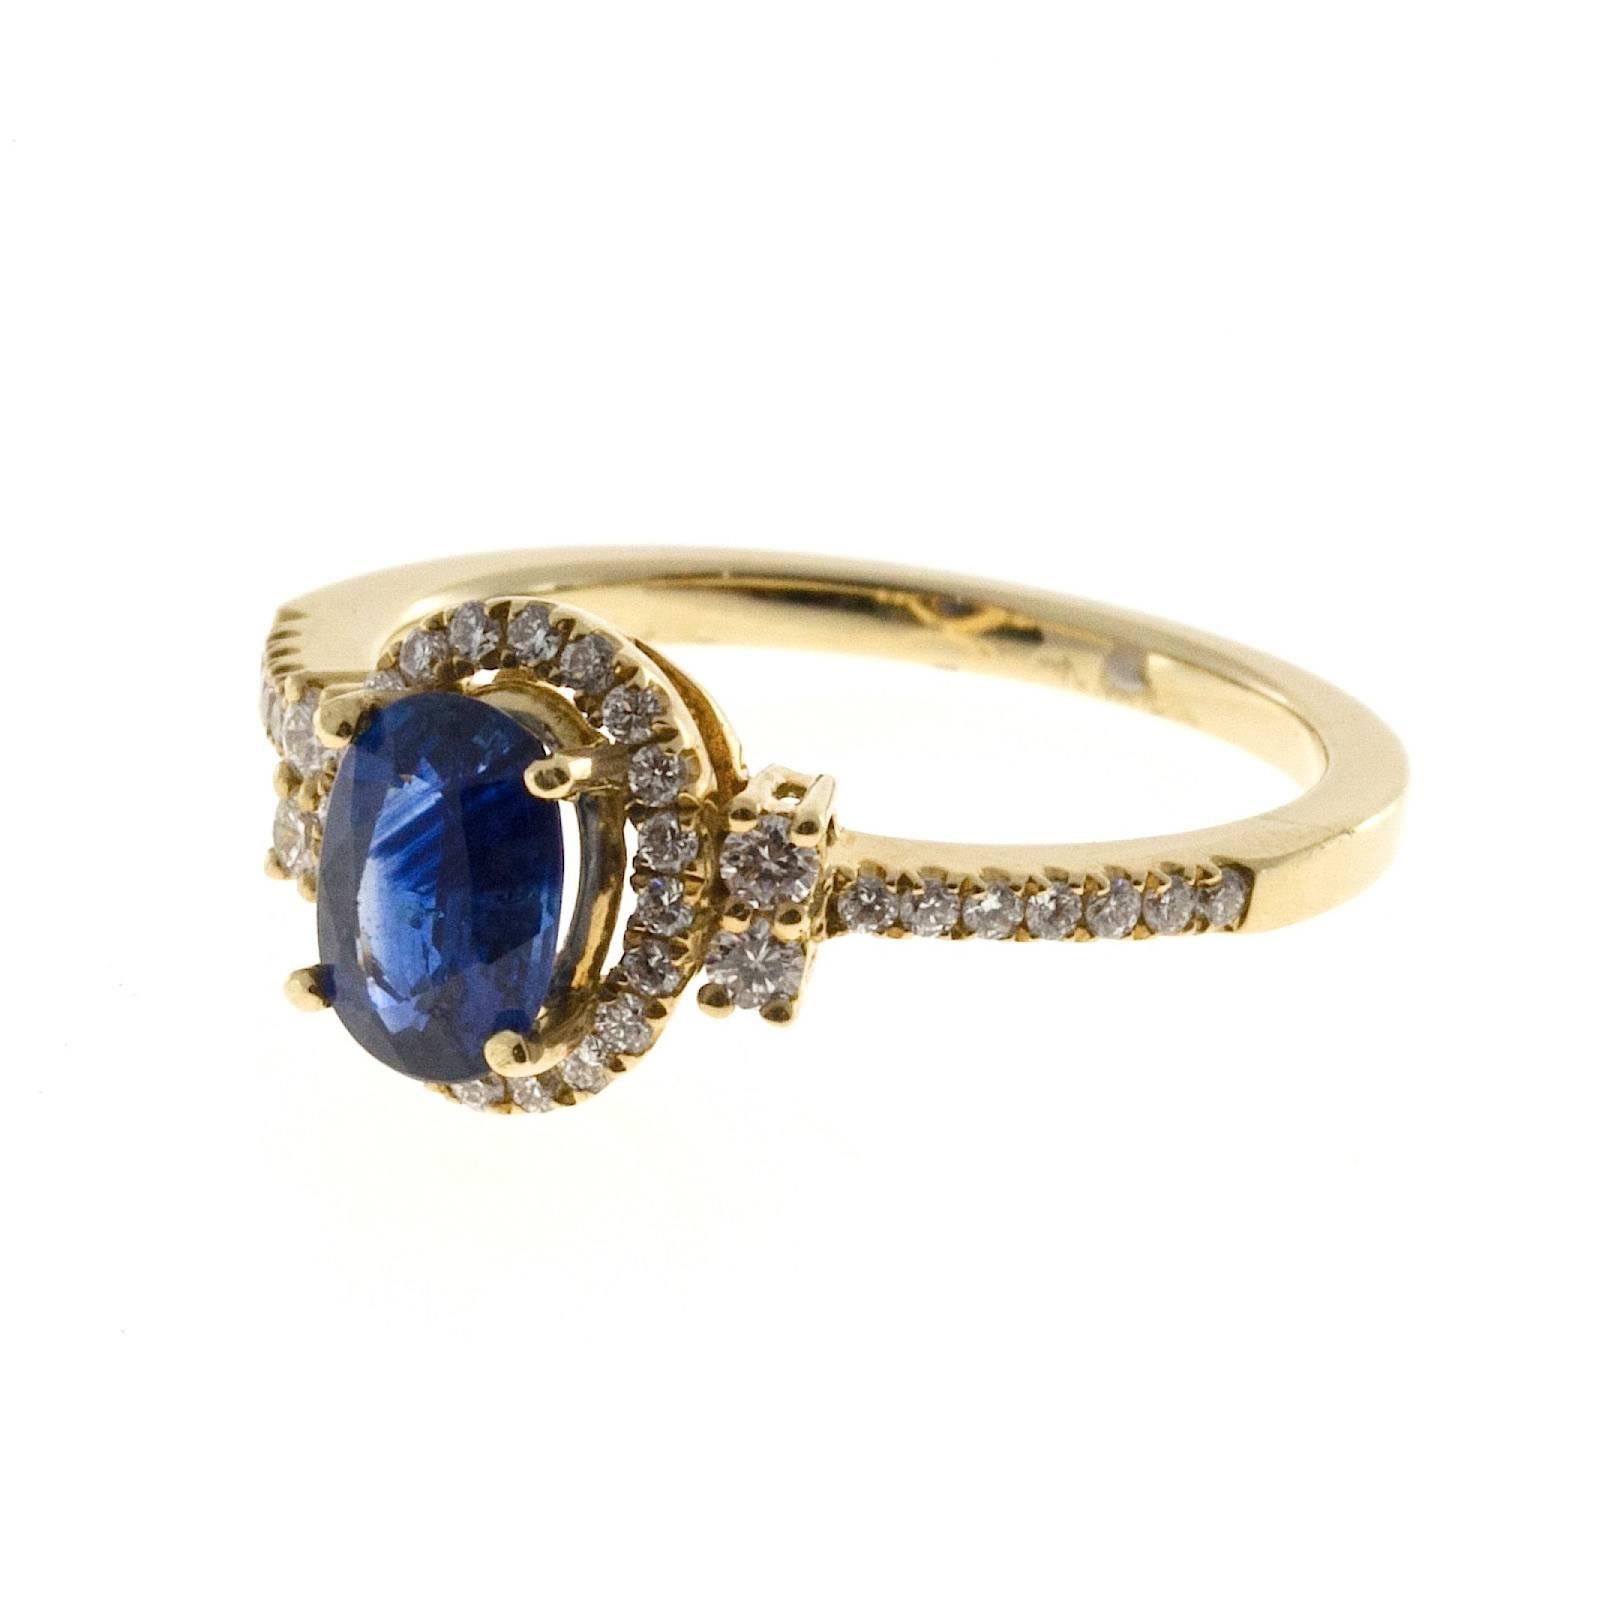 Beautiful deep bright blue 1.00 oval Sapphire ring, simple heat only and no other enhancements. Fine white full cut diamonds.

1 oval Sapphire approx. total weight 1.00cts, fine bright blue, simple heat, no other enhancements.
34 full cut